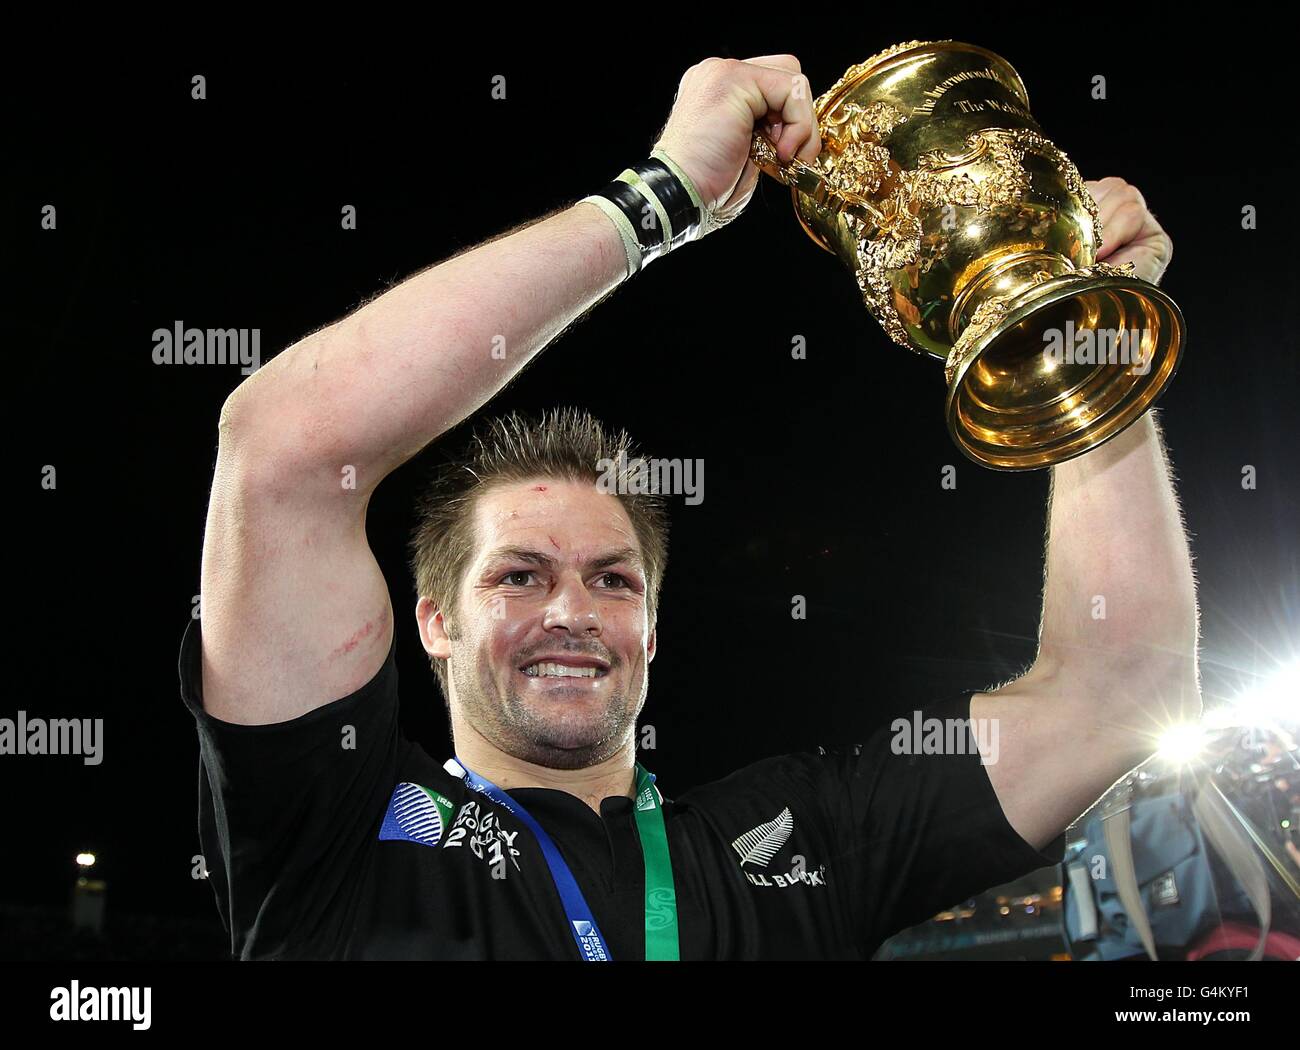 Rugby Union - Rugby World Cup 2011 - Final - France v New Zealand - Eden Park. New Zealand captain Richie McCaw with the Webb Ellis Cup as he celebrates winning the World Cup Final Stock Photo